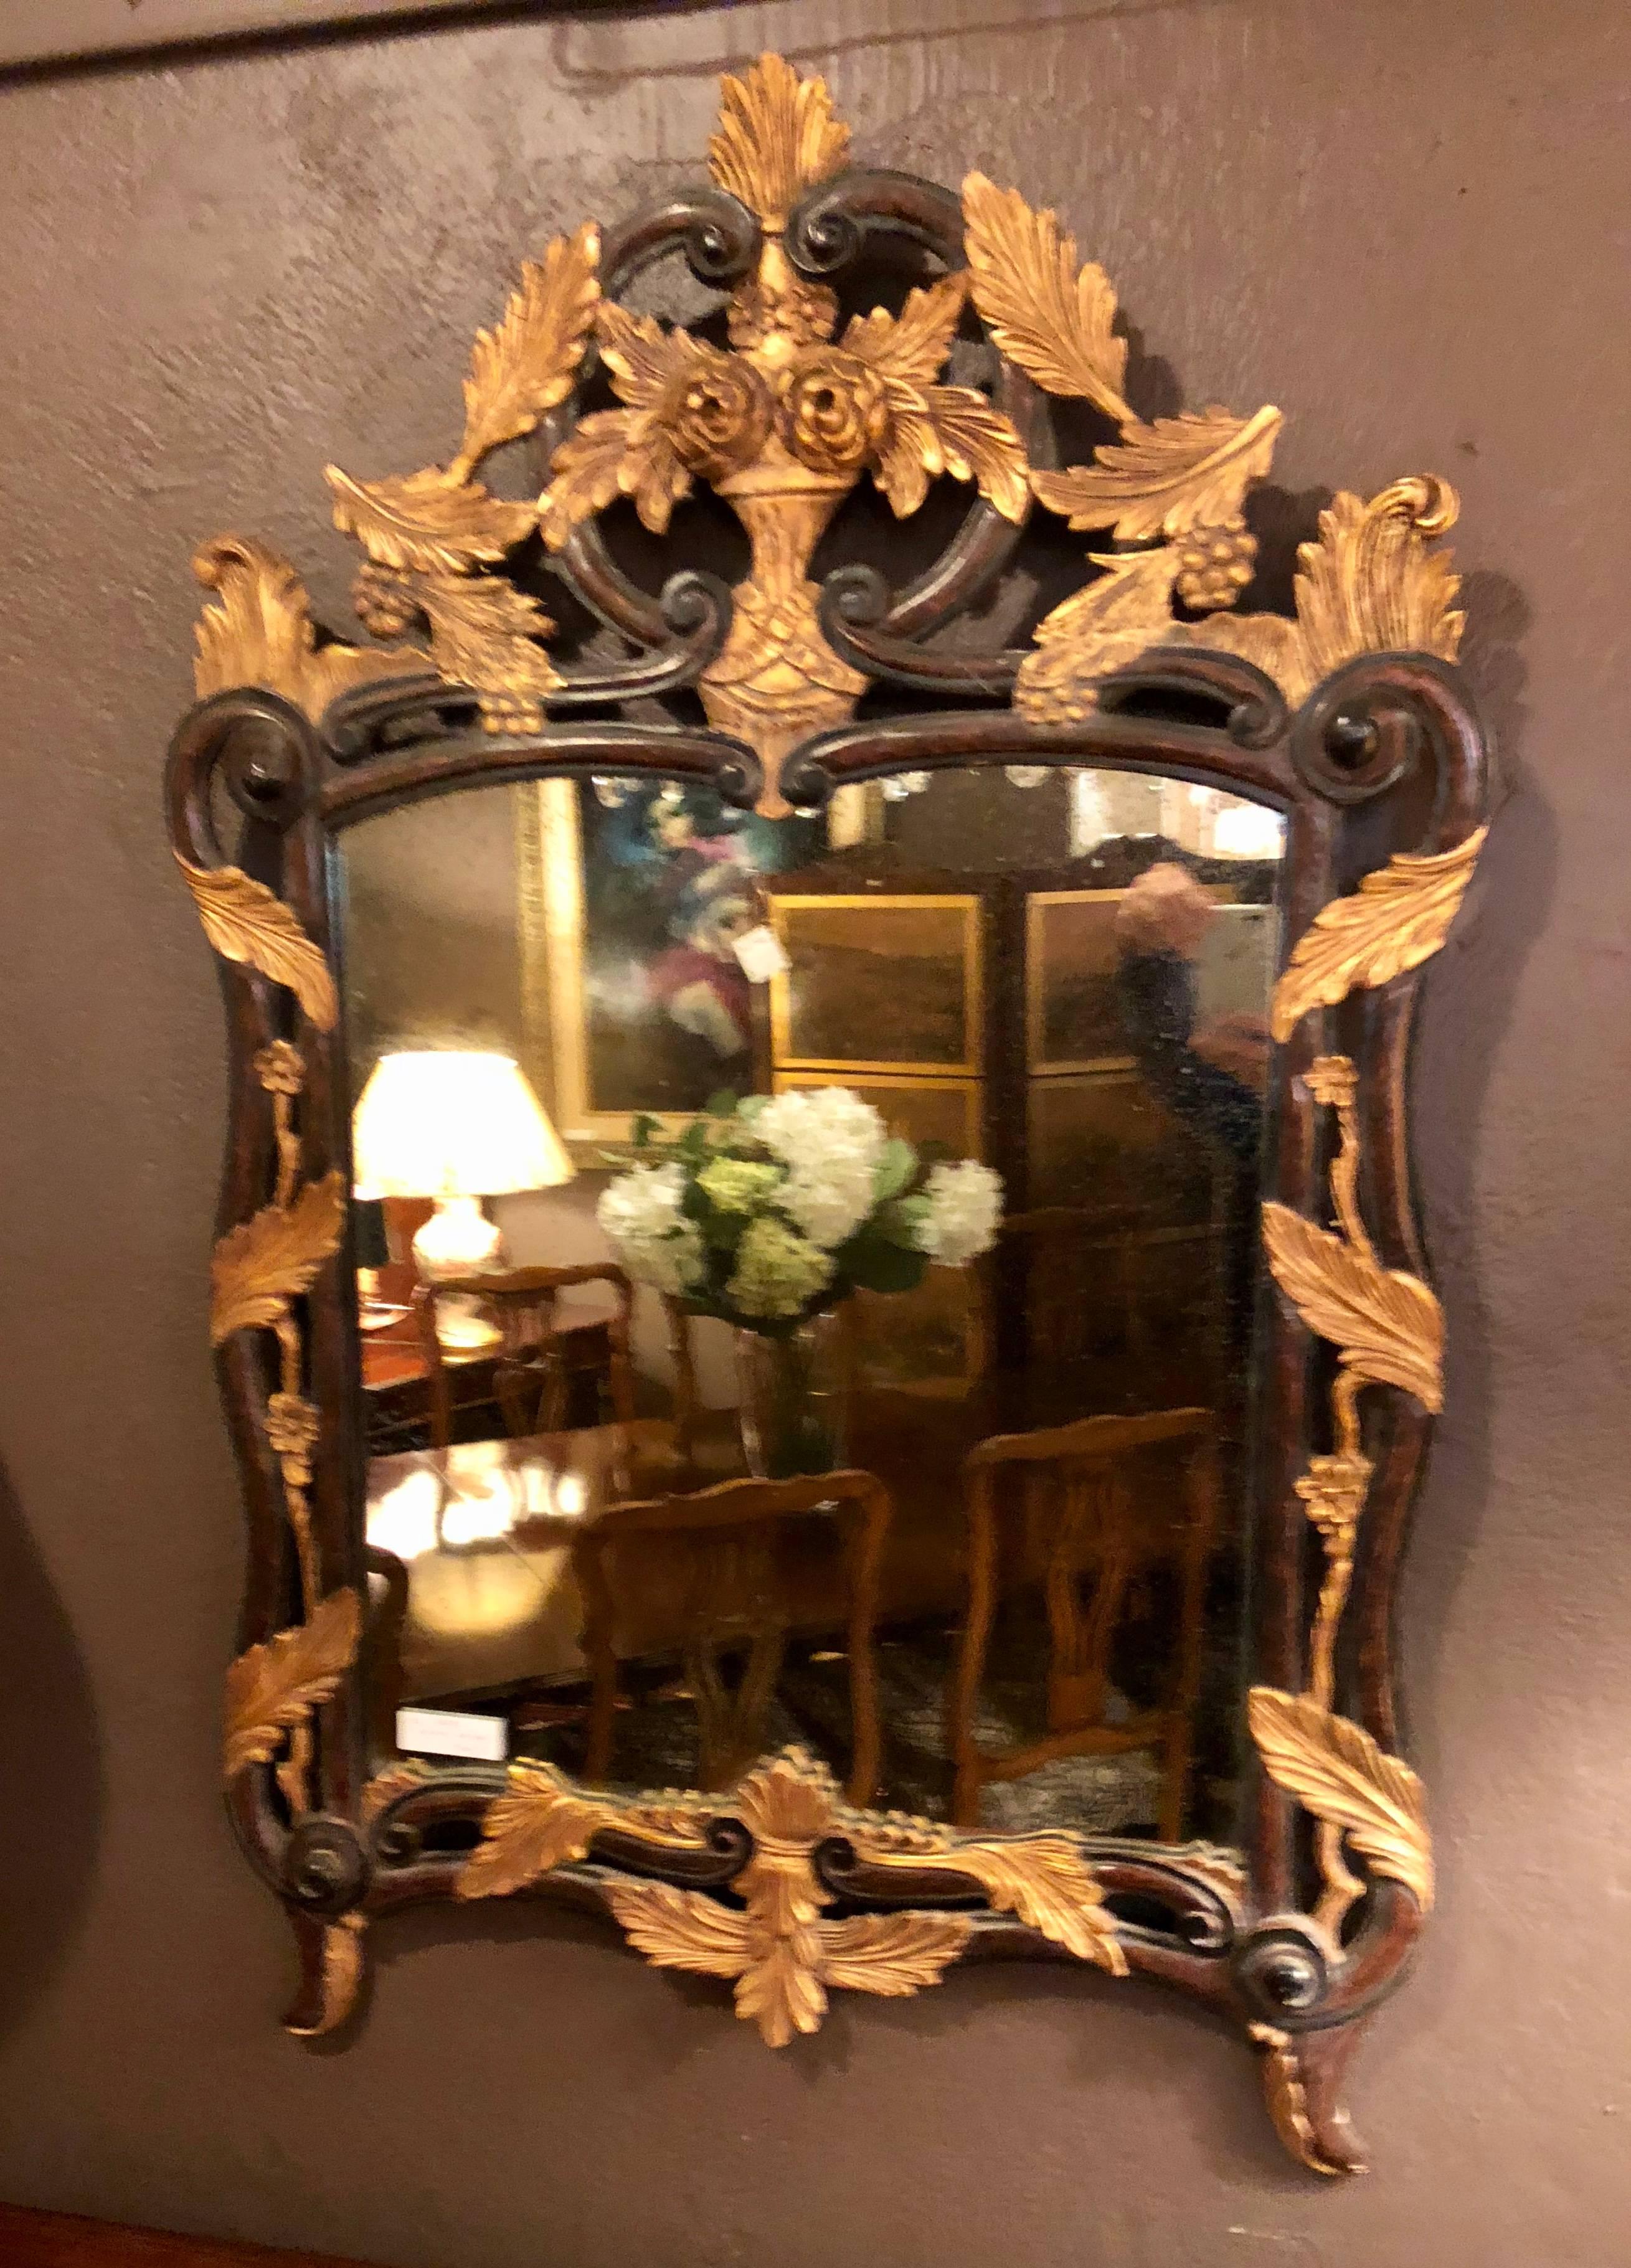 French Regency antique mirror of mahogany and gilt with basket of roses design. The gilt on this piece is exceptional as are the carvings of grapes, roses, vines and scrolls that flanked the antique centre mirror.